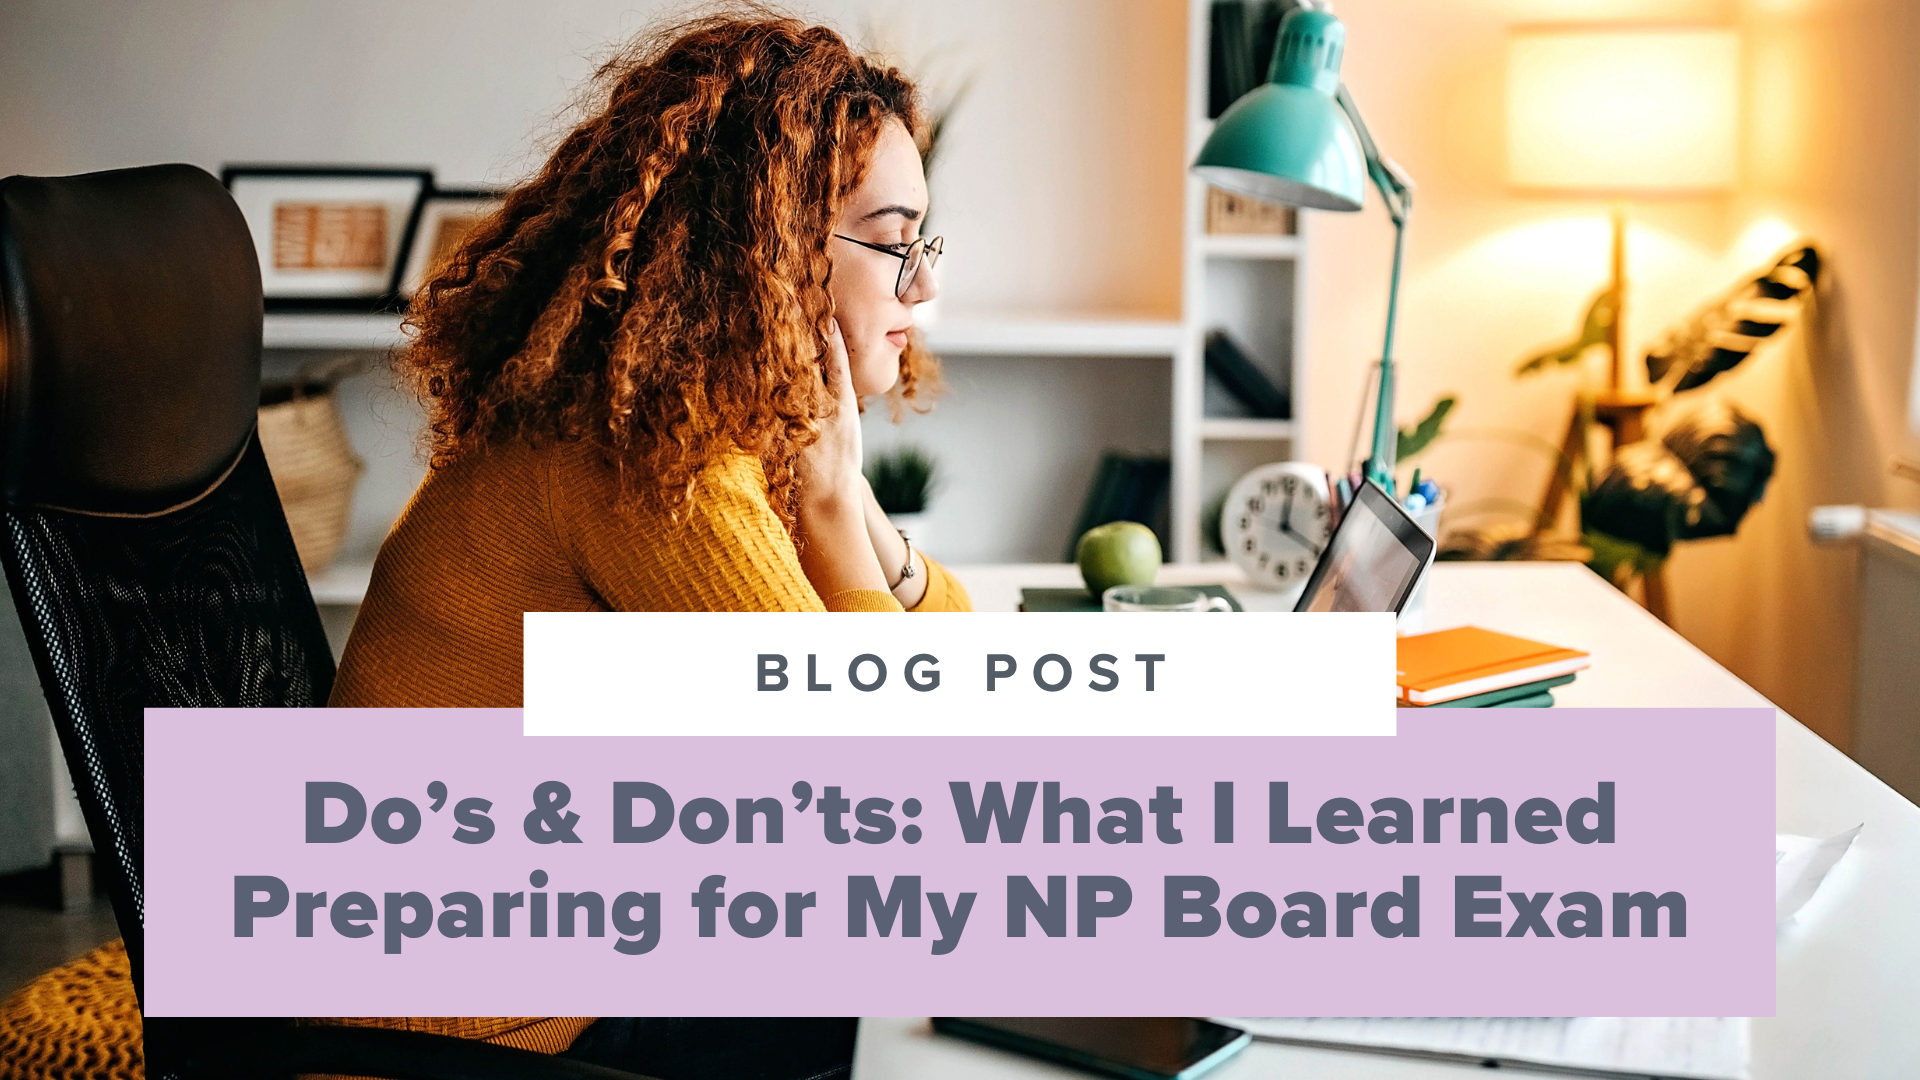 SMNP Blog - 13 Do’s & Don’ts for Your NP Board Prep